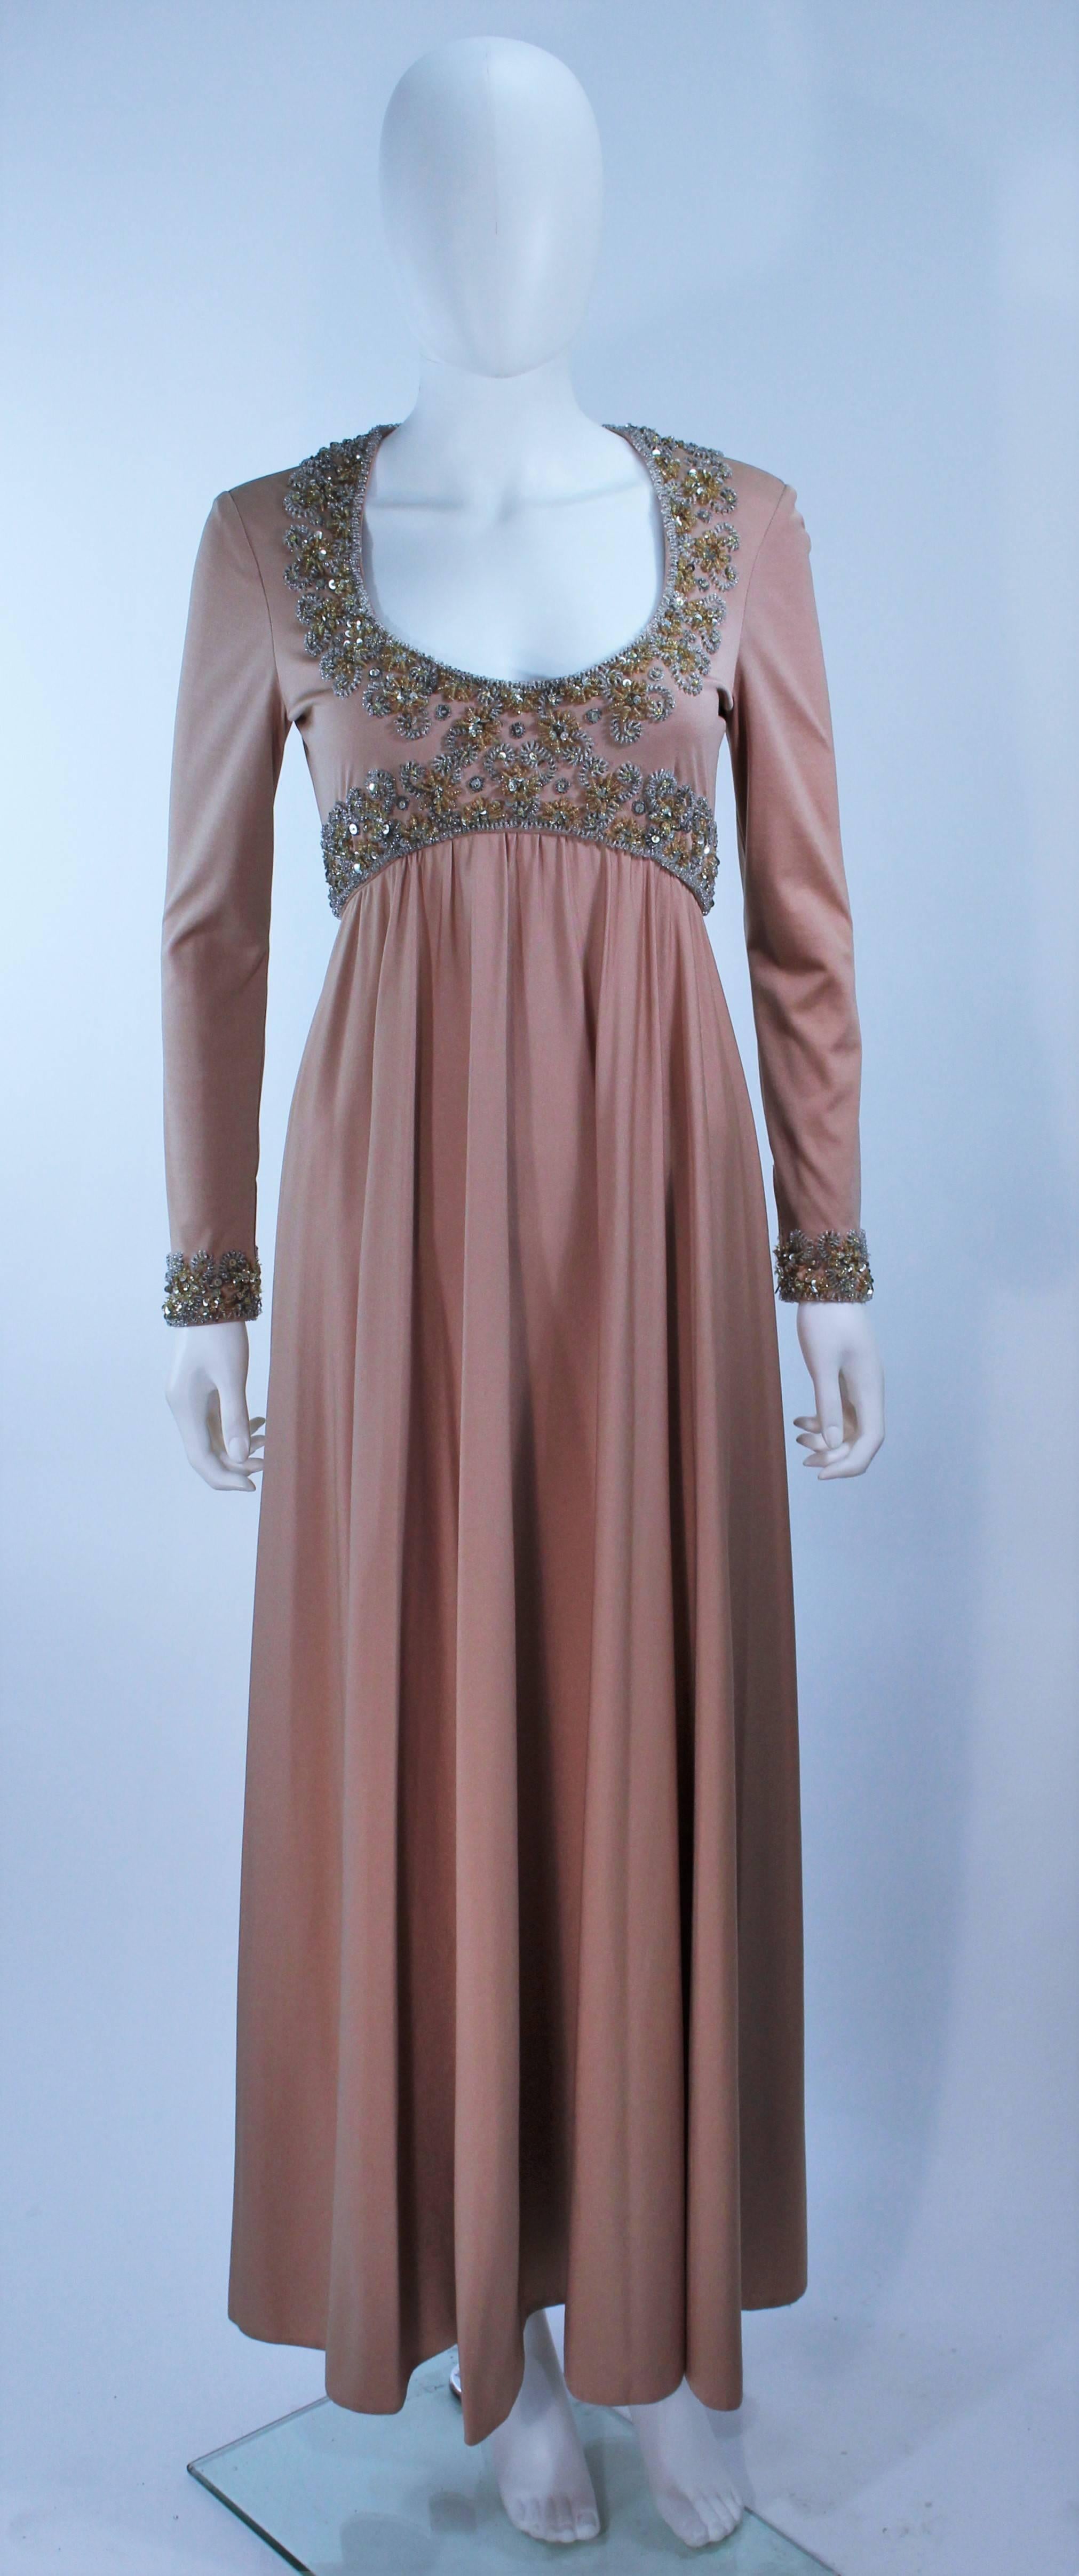  This gown is composed of a toffee hue jersey with a beaded applique on the bust and sleeves. Features a draped design with a center back zipper closure, and hook & eyes at the sleeve end. In excellent vintage condition.

  **Please